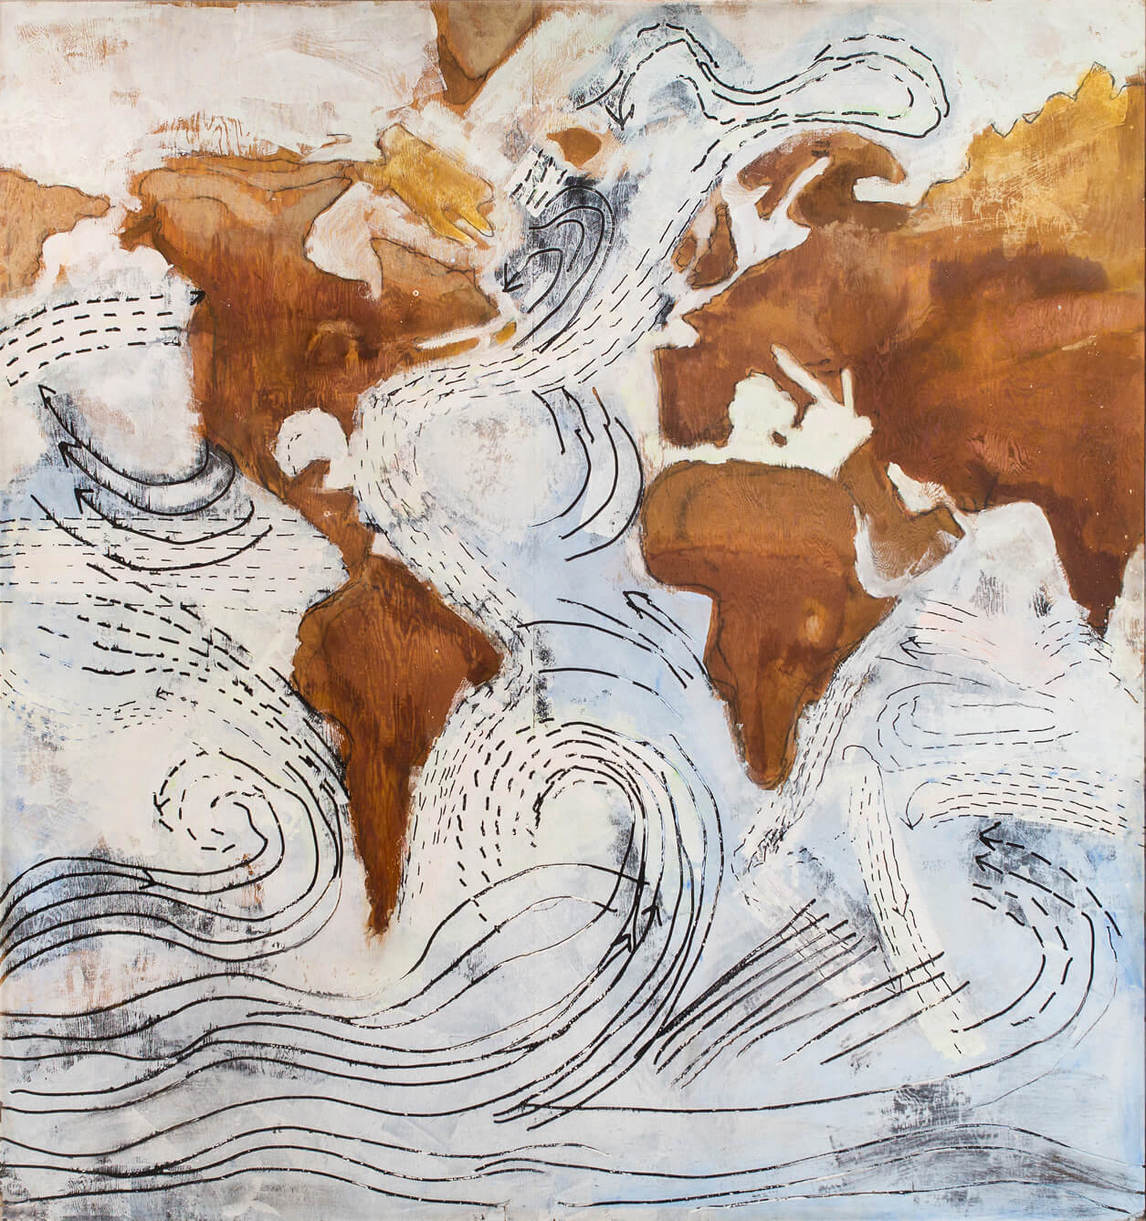 Ocean Currents, 1977, by Paterson Ewen